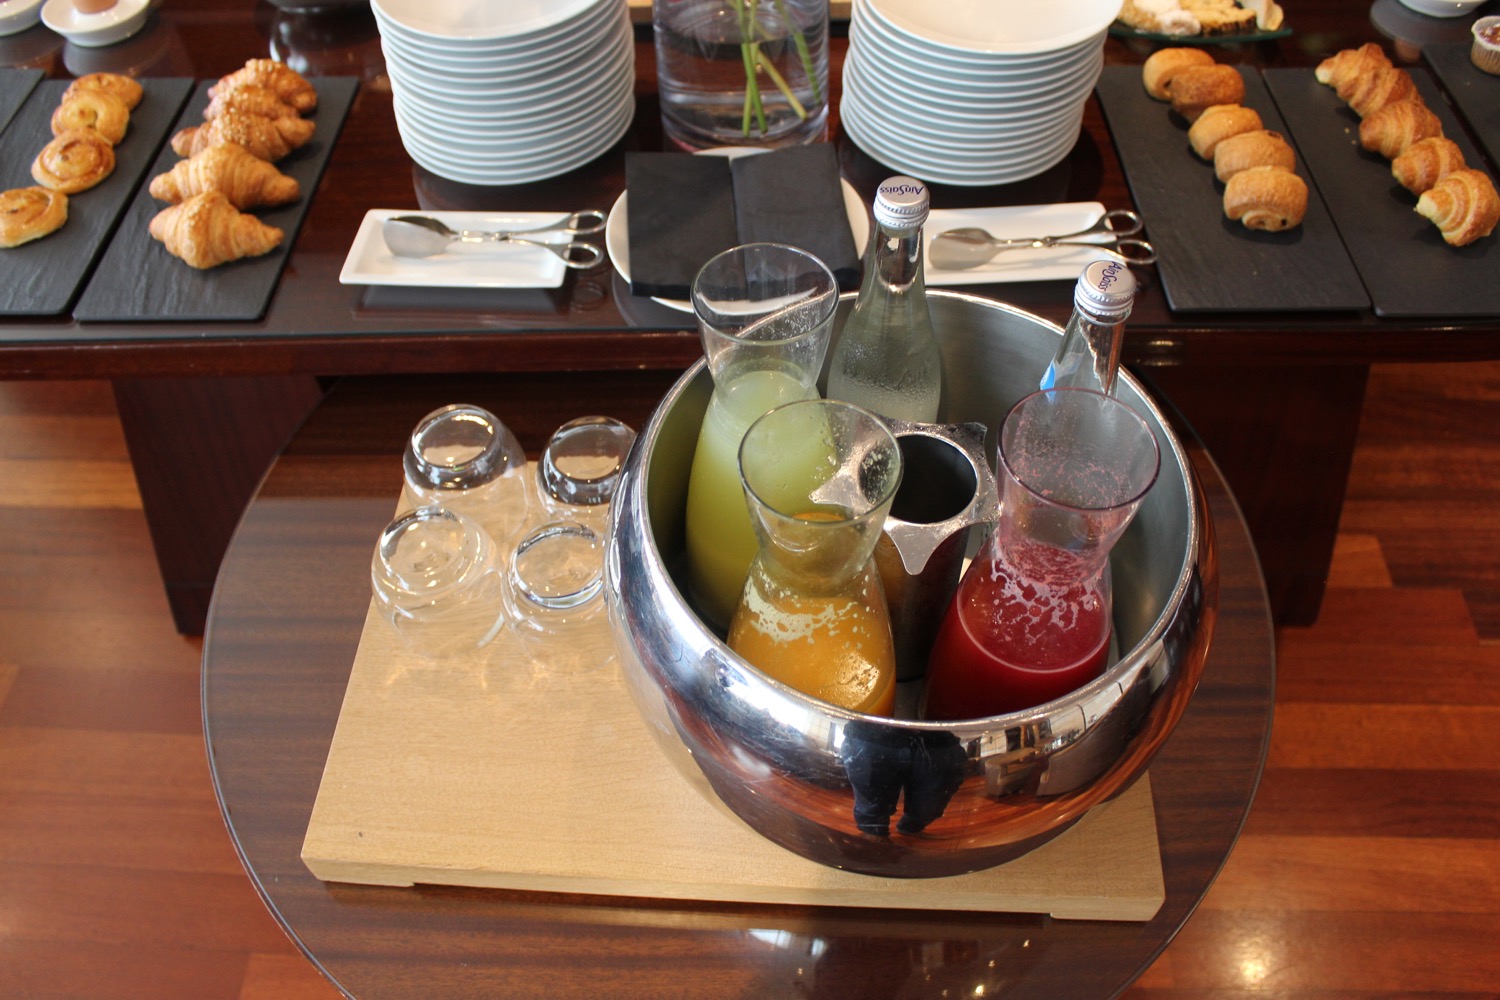 a bowl of juice and glasses on a table